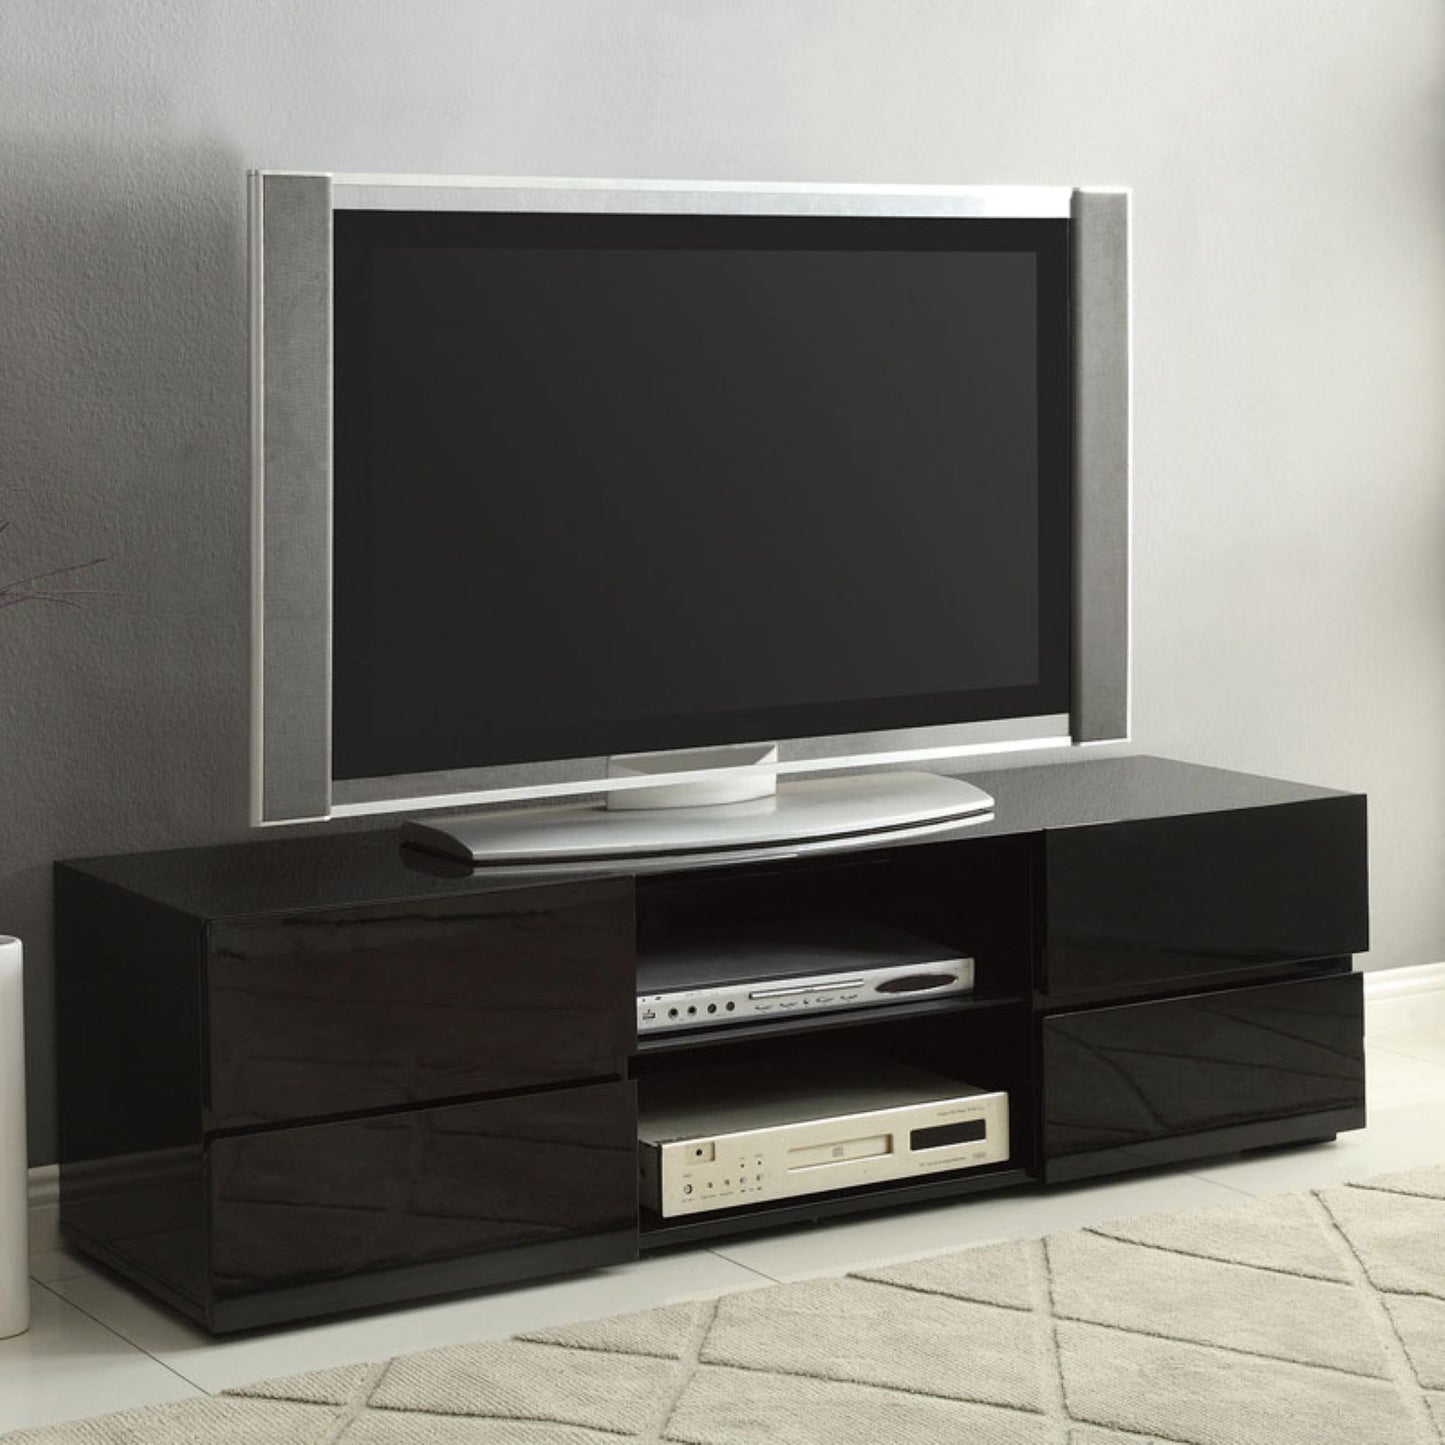 4-drawer TV Console Glossy Black